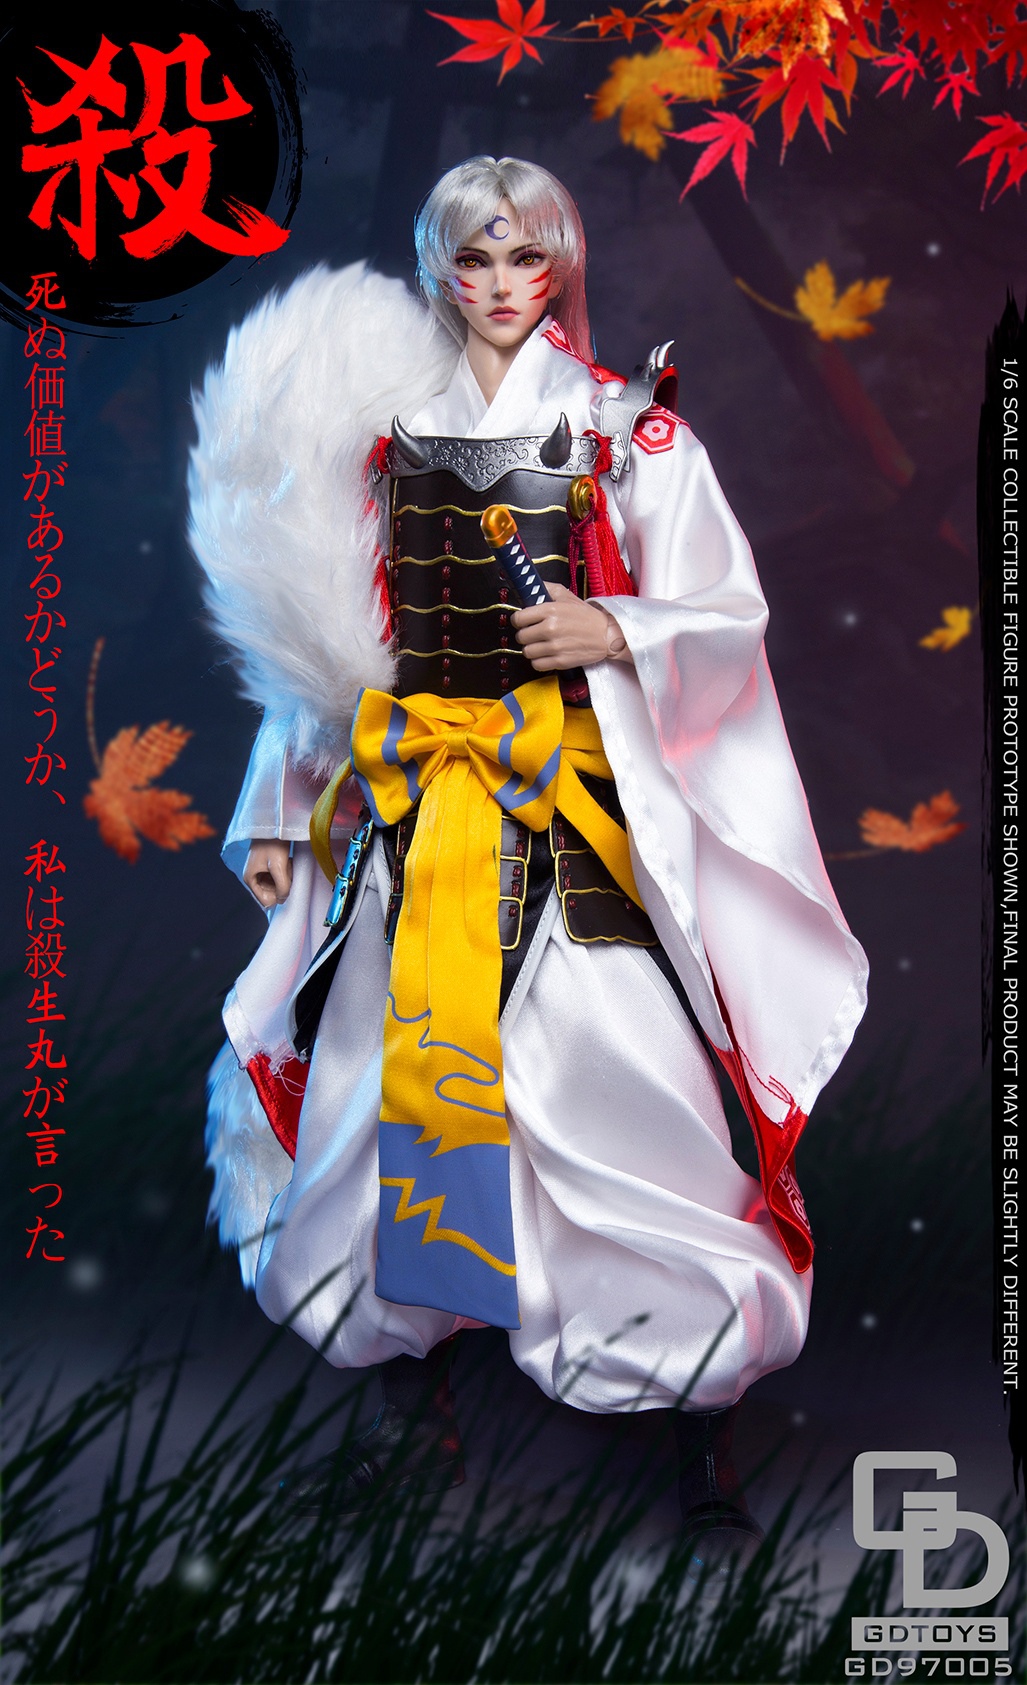 NEW PRODUCT: GDTOYS - Son of the Fighting Tooth King - Dog Demon Swordsman GD97005 0197